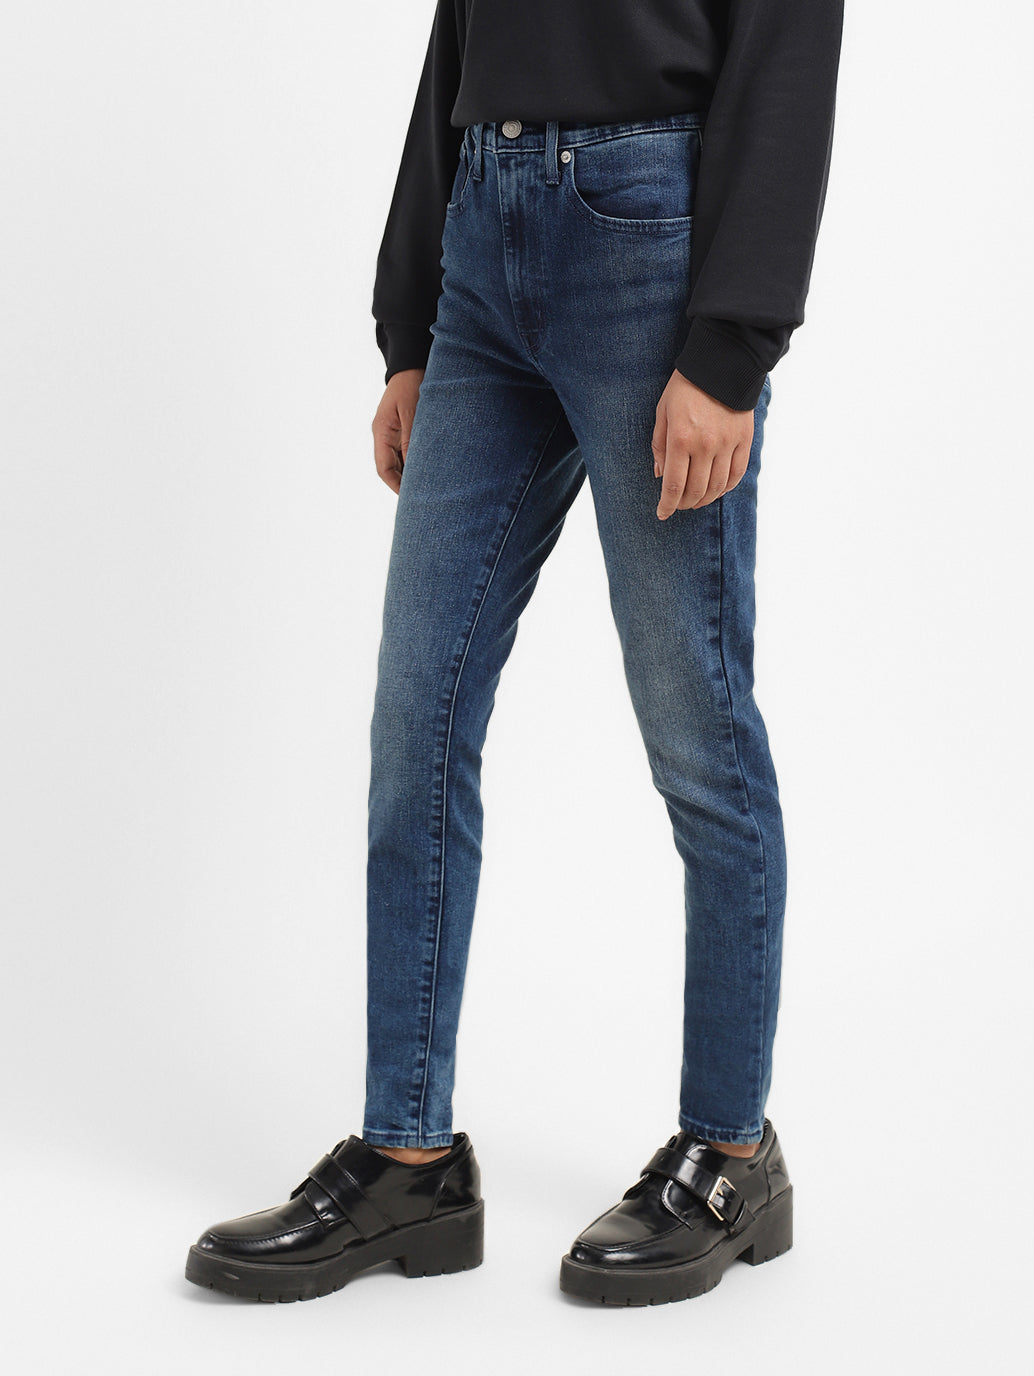 Women's Mid Rise Skinny Fit Jeans